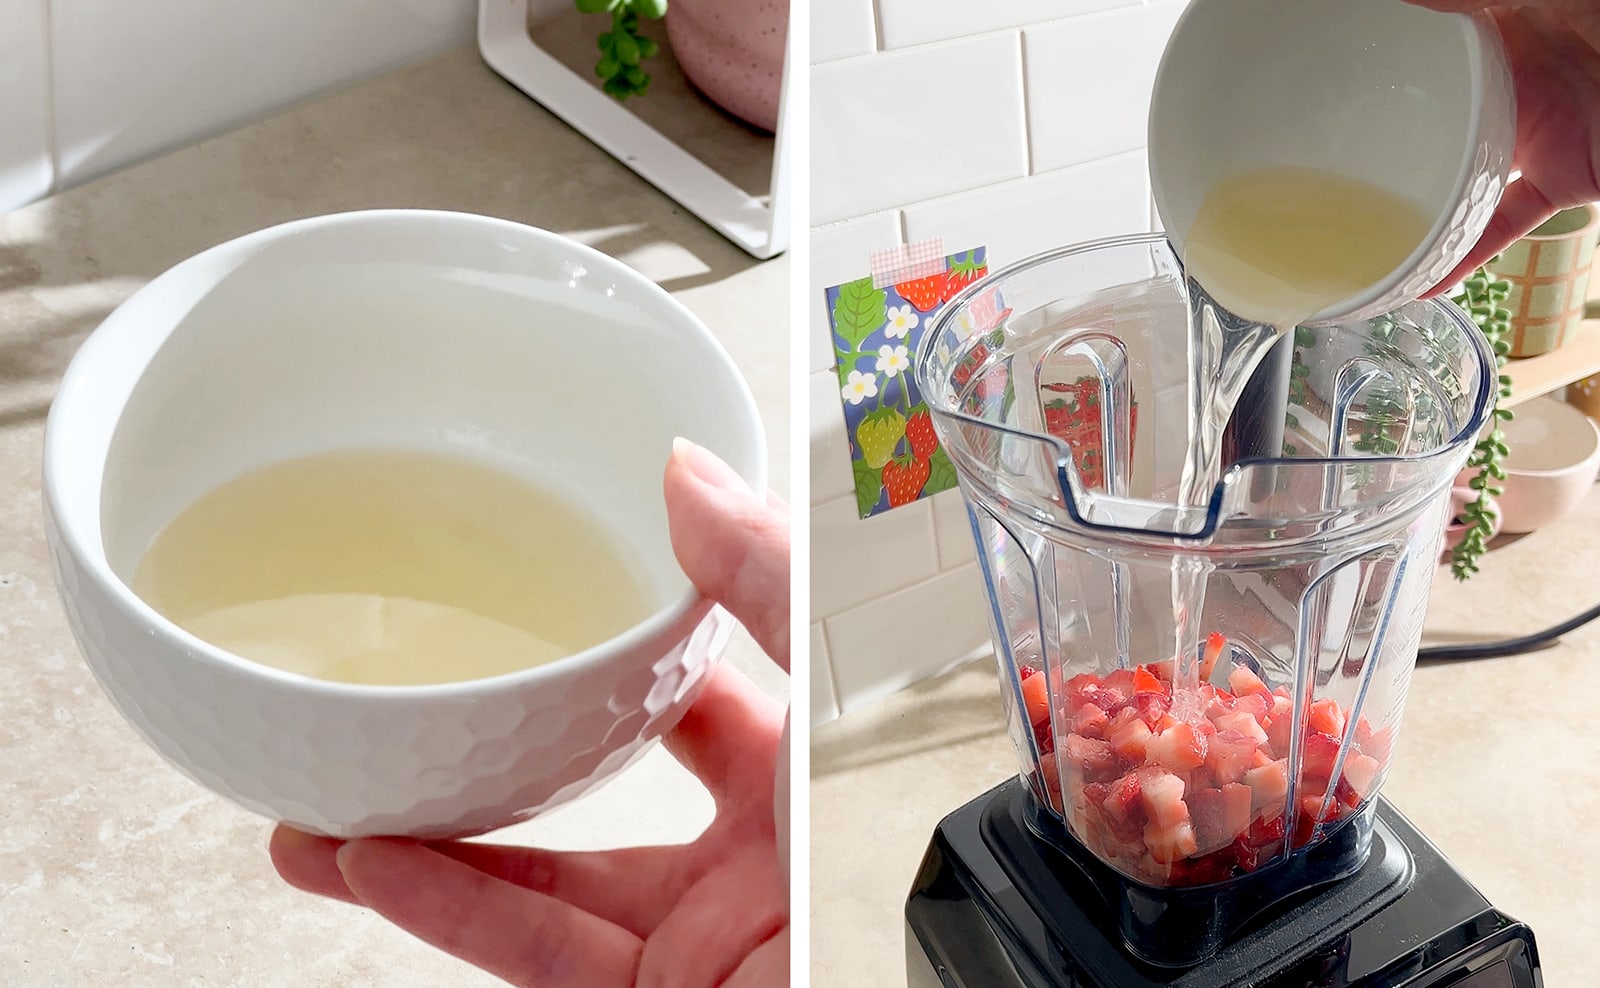 Left to right: hand holding bowl of dissolved gelatin, pouring liquid gelatin into blender filled with diced strawberries.